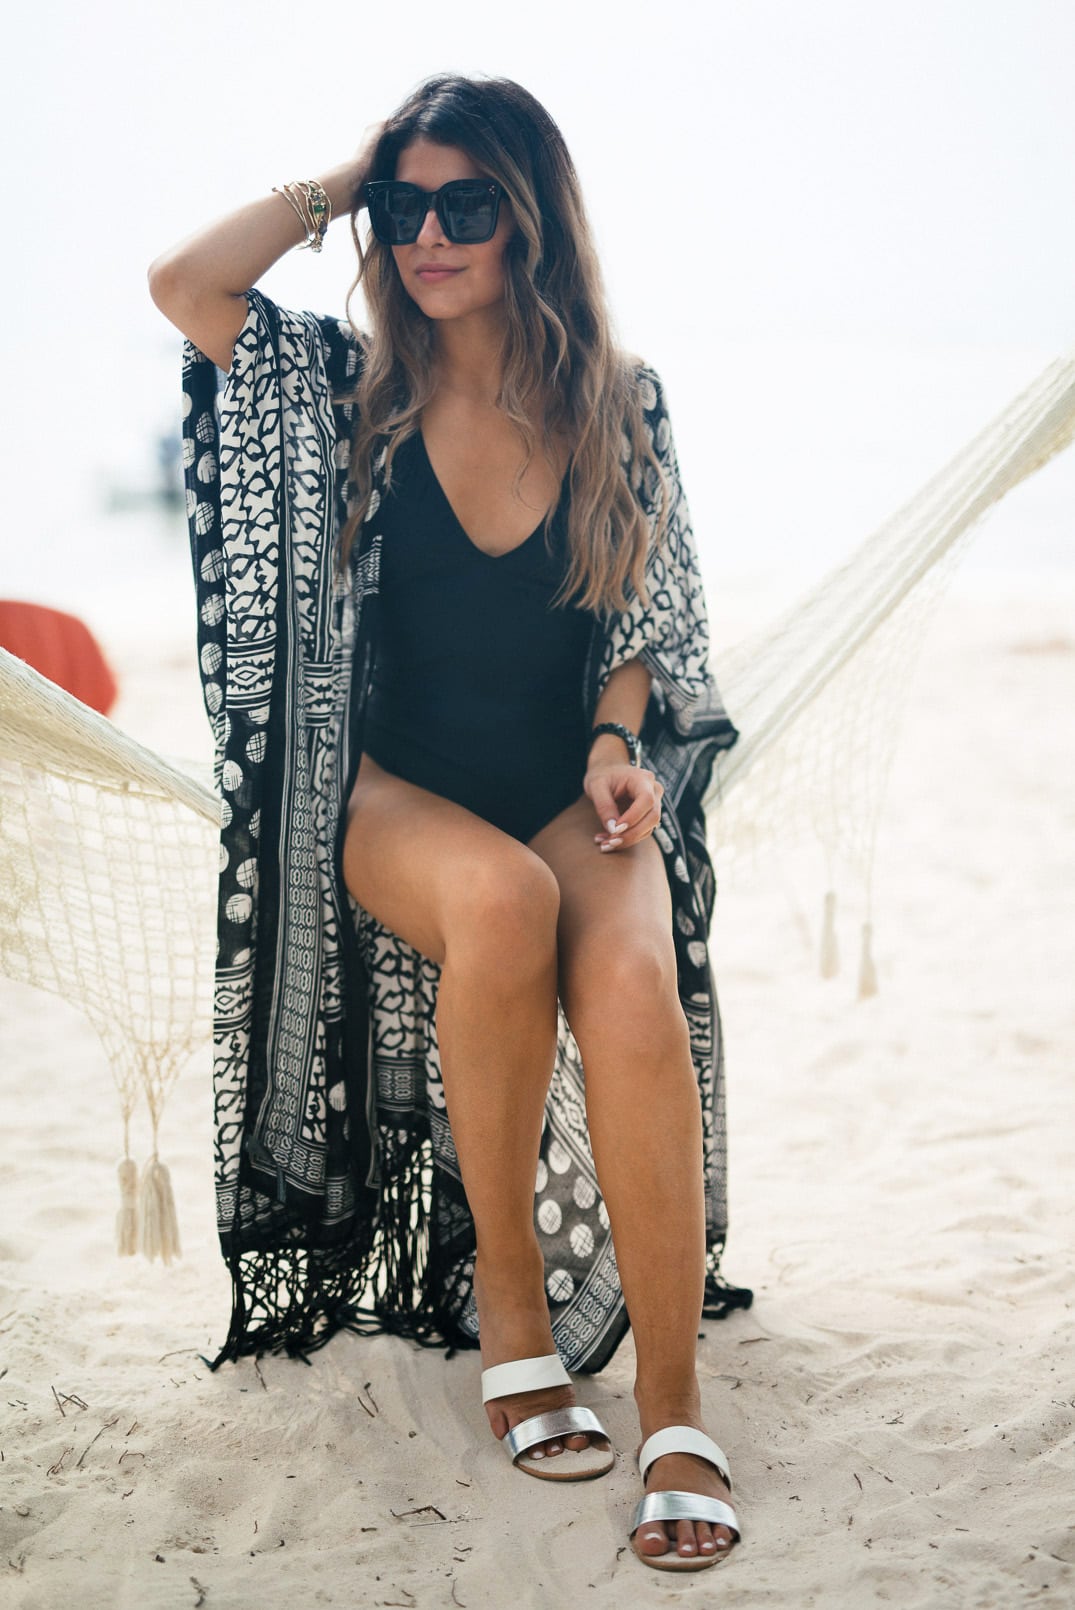 Pam Hetlinger, The Girl From Panama wearing an express black deep v high cut one-piece swimsuit, express mixed black and white print cover-up, two strap slide sandals and a Panama Hat.